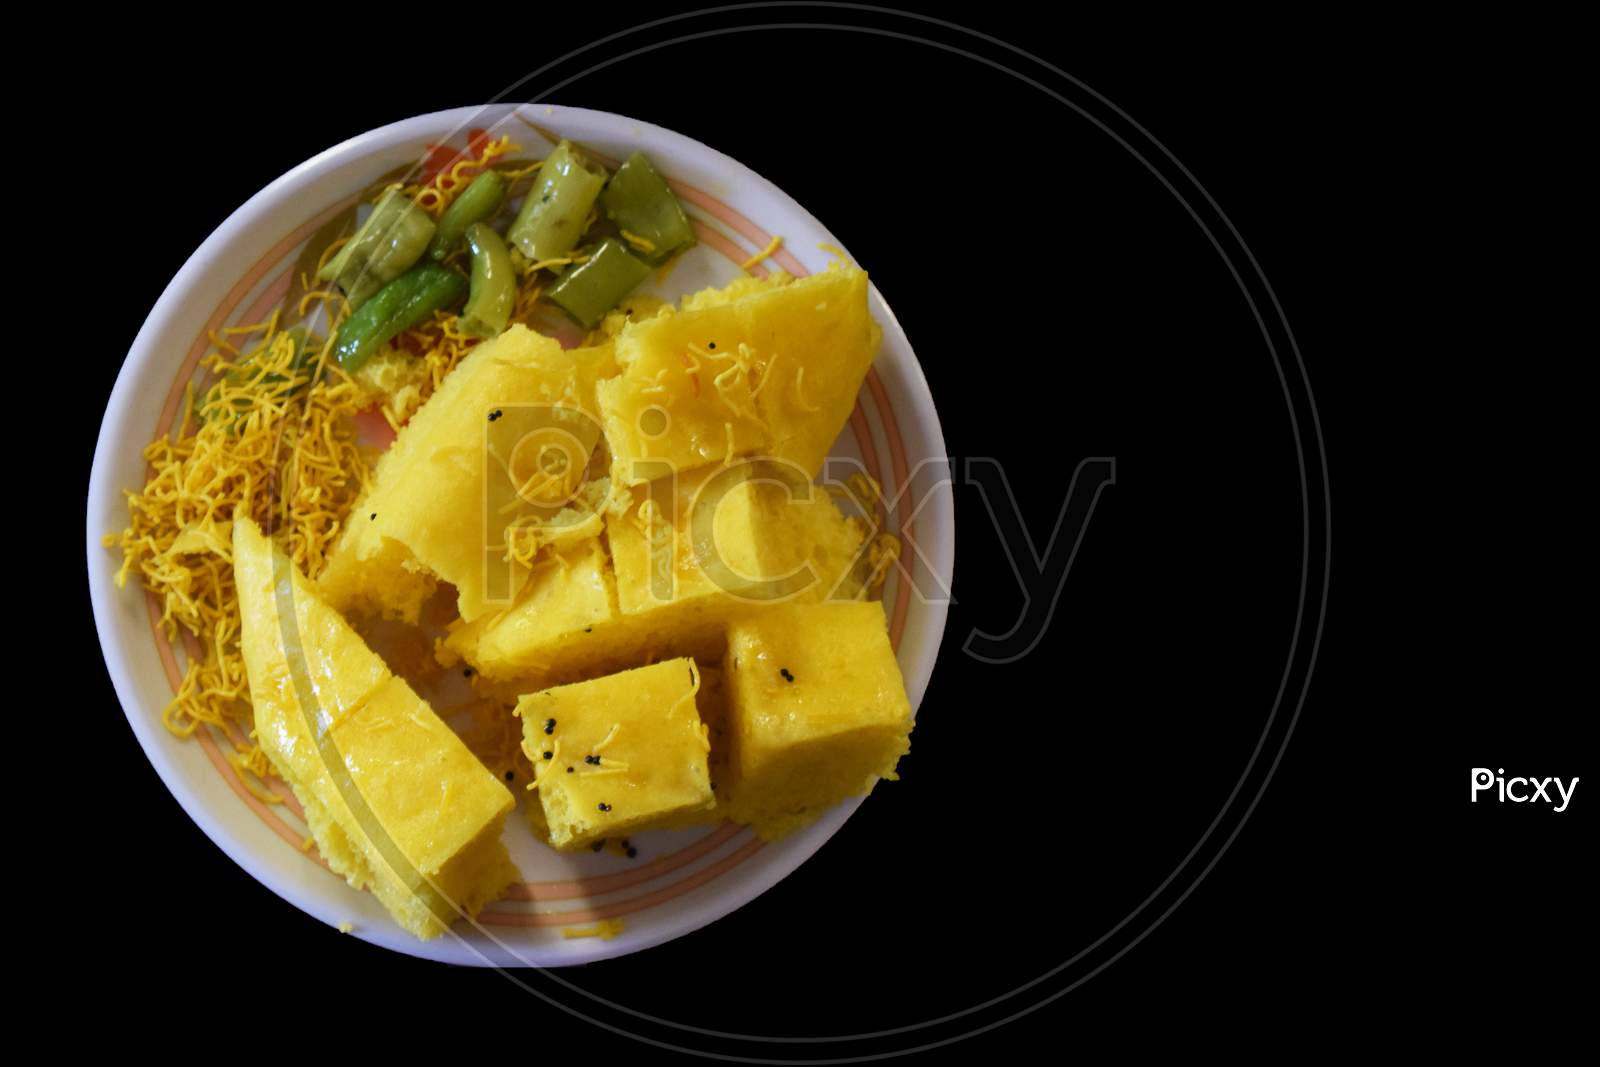 Khaman with sev and mirchi in plate top view with black background